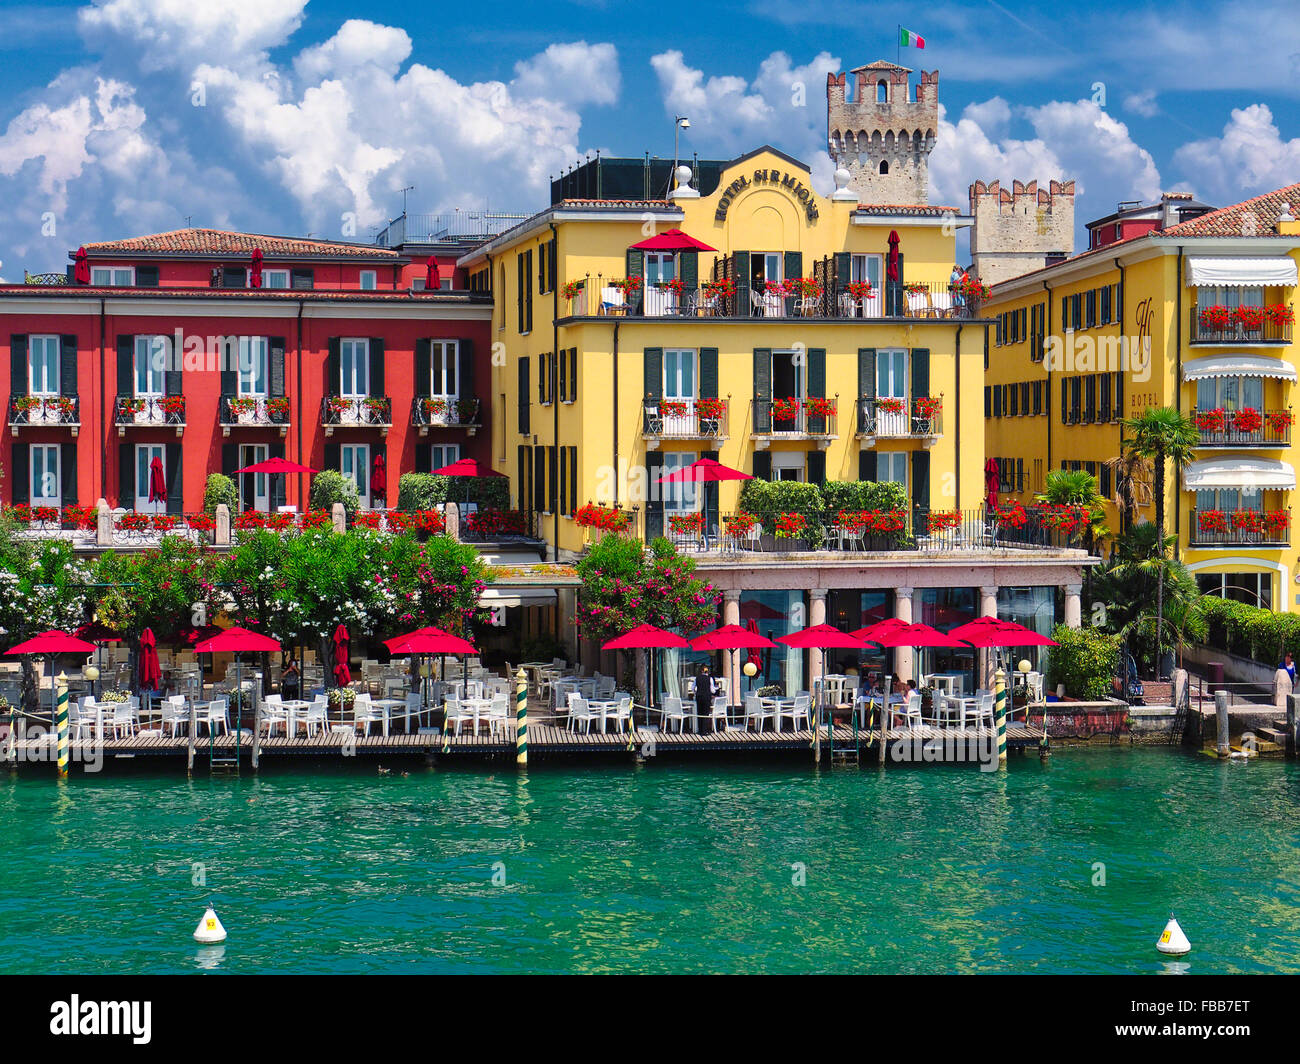 High Angle View of the Hotel Sirmione at a Waterfront, Sirmione, Lake Garda, Brescia Province, Italy Stock Photo